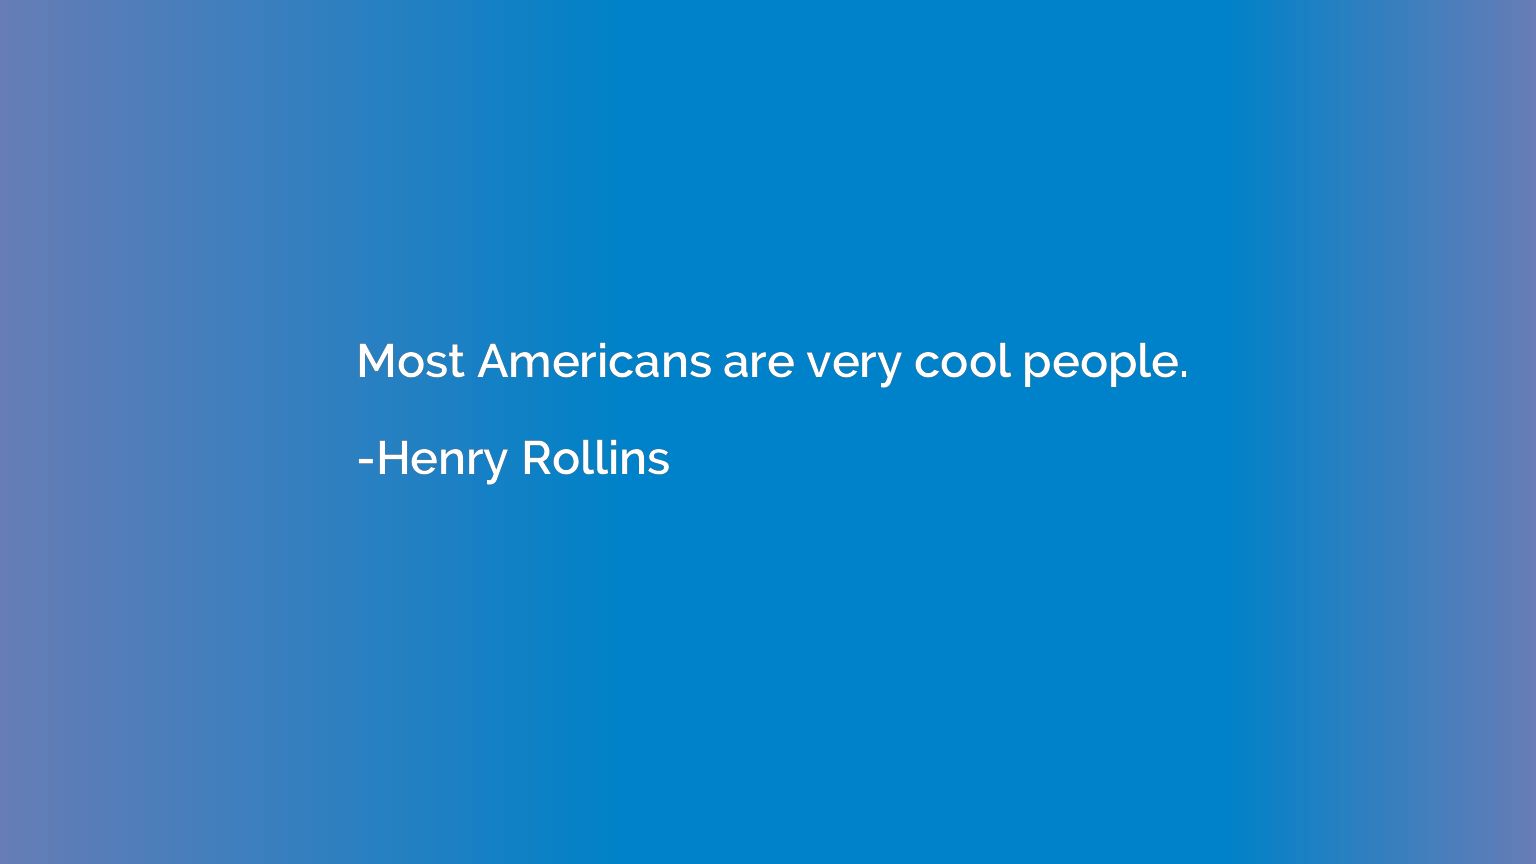 Most Americans are very cool people.